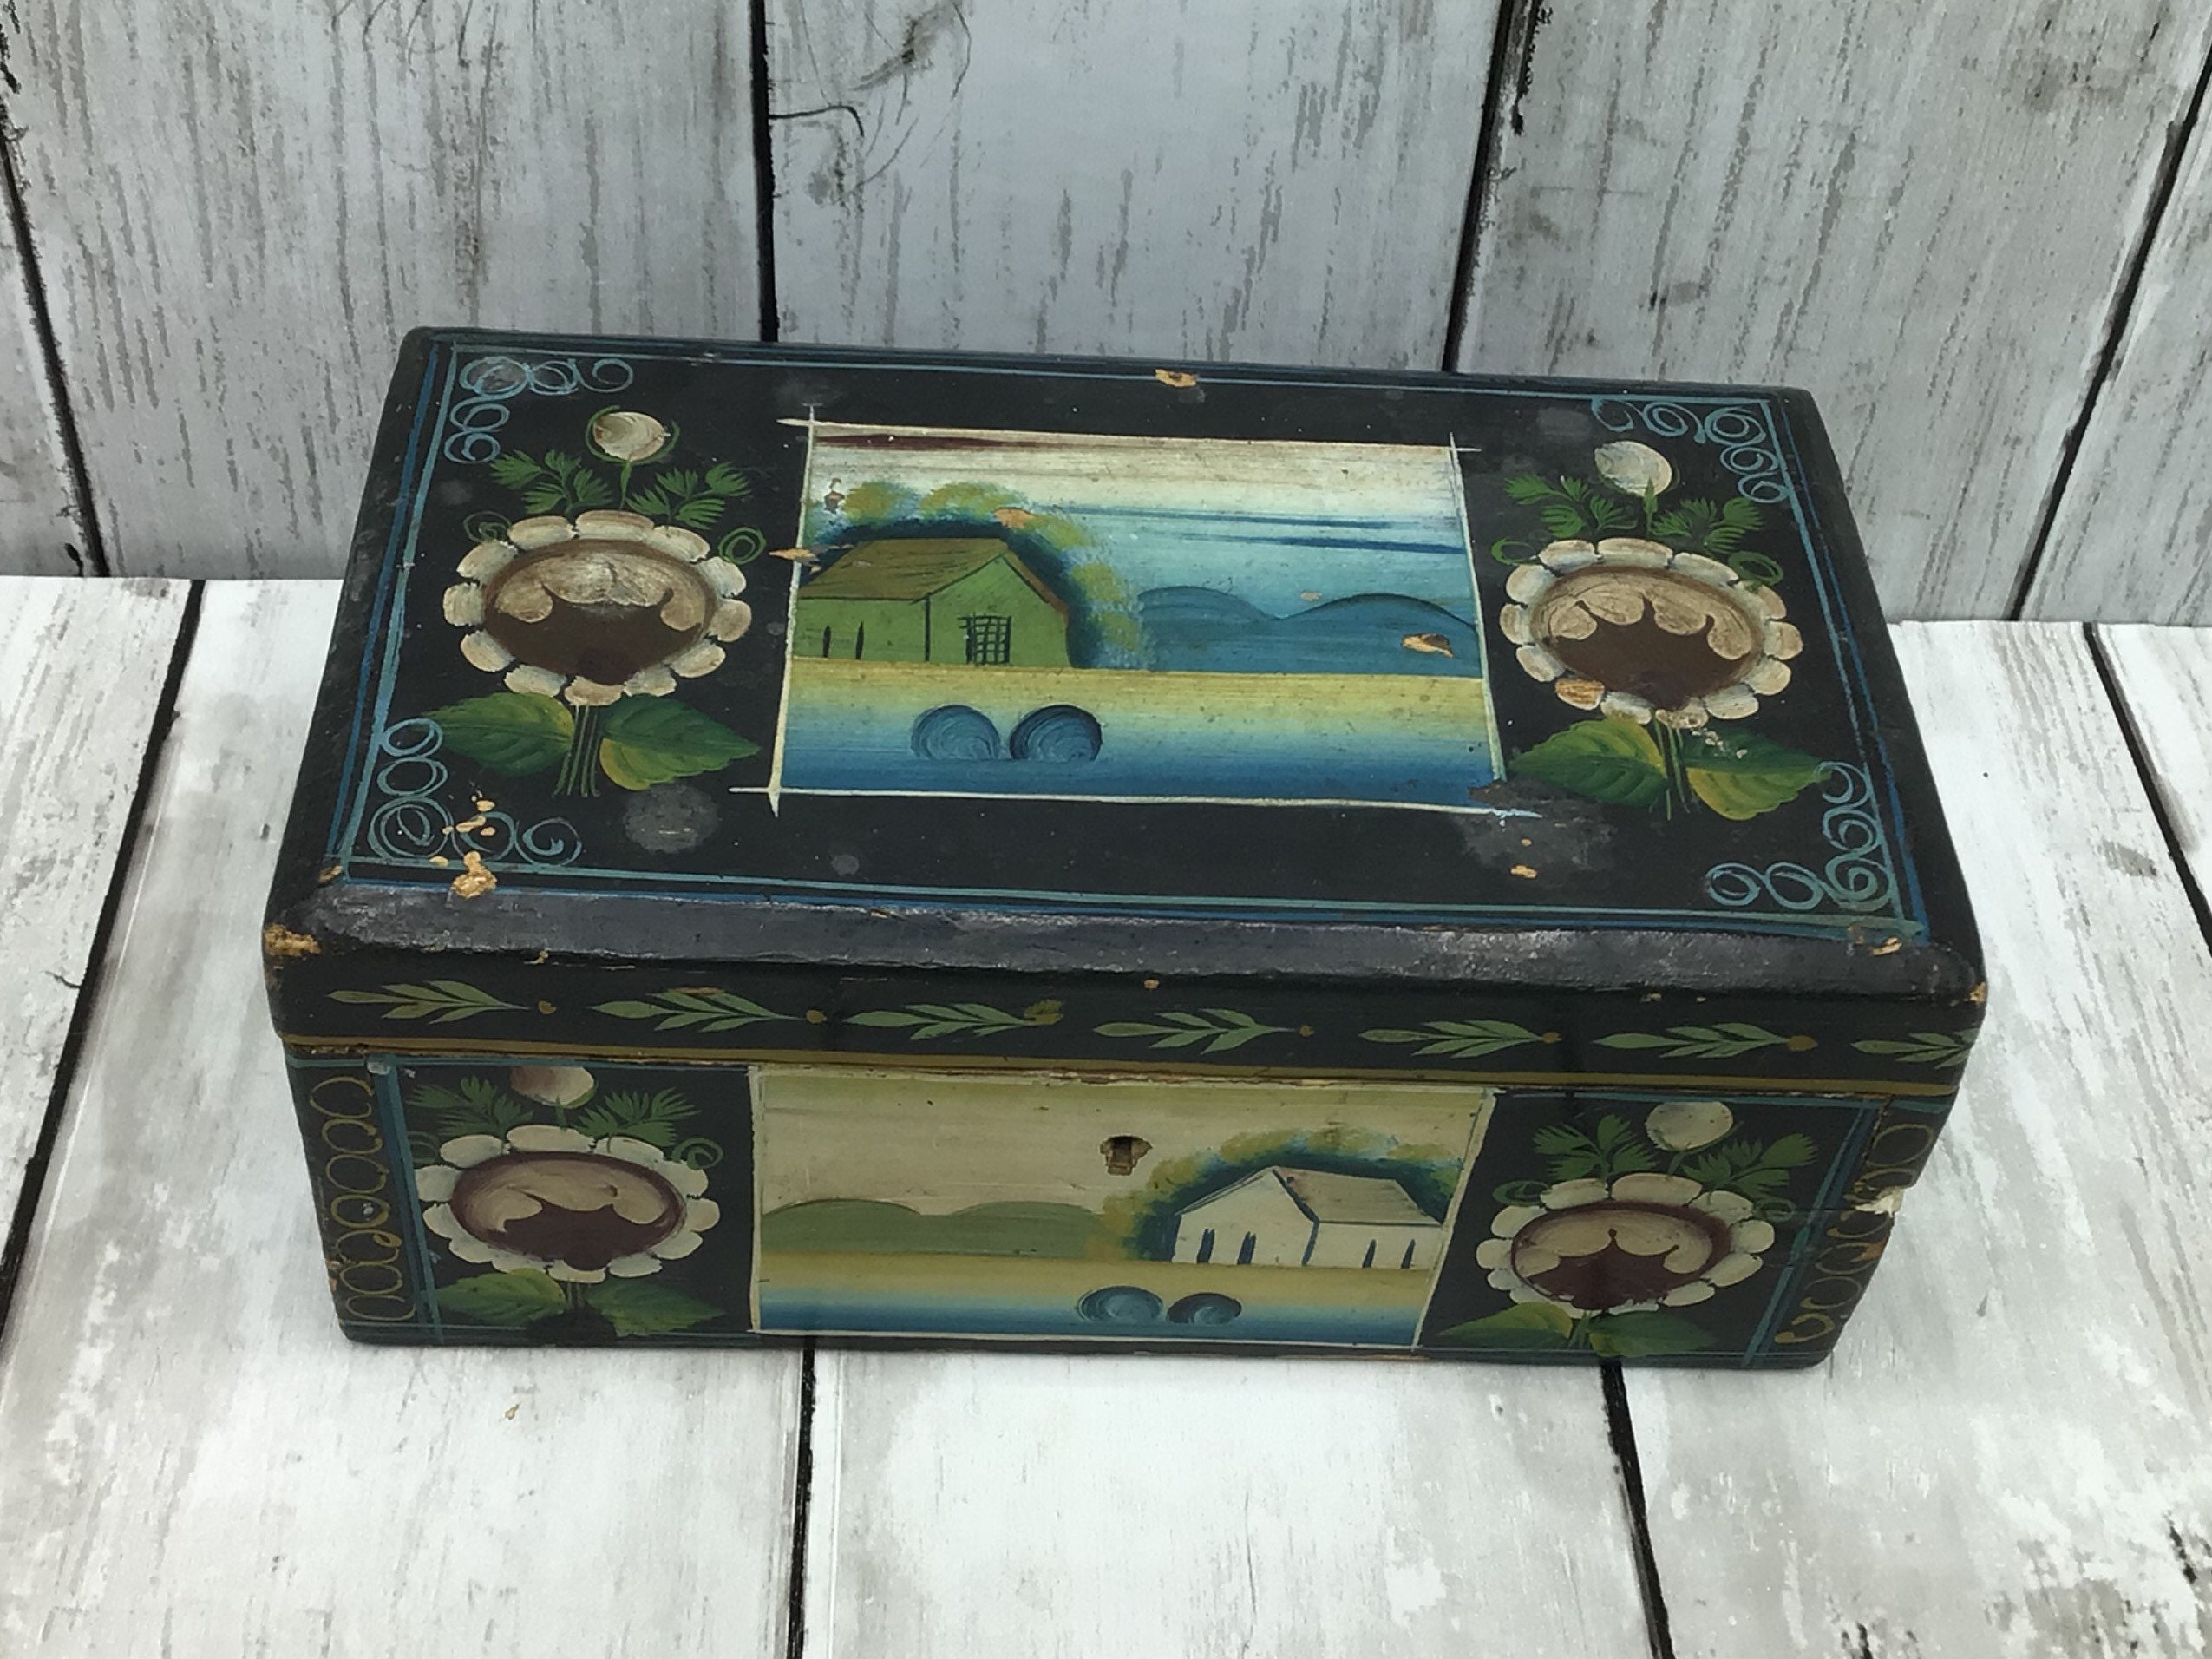 Sold at Auction: 4 American Folk Art Boxes, incl. Candle & Document Boxes